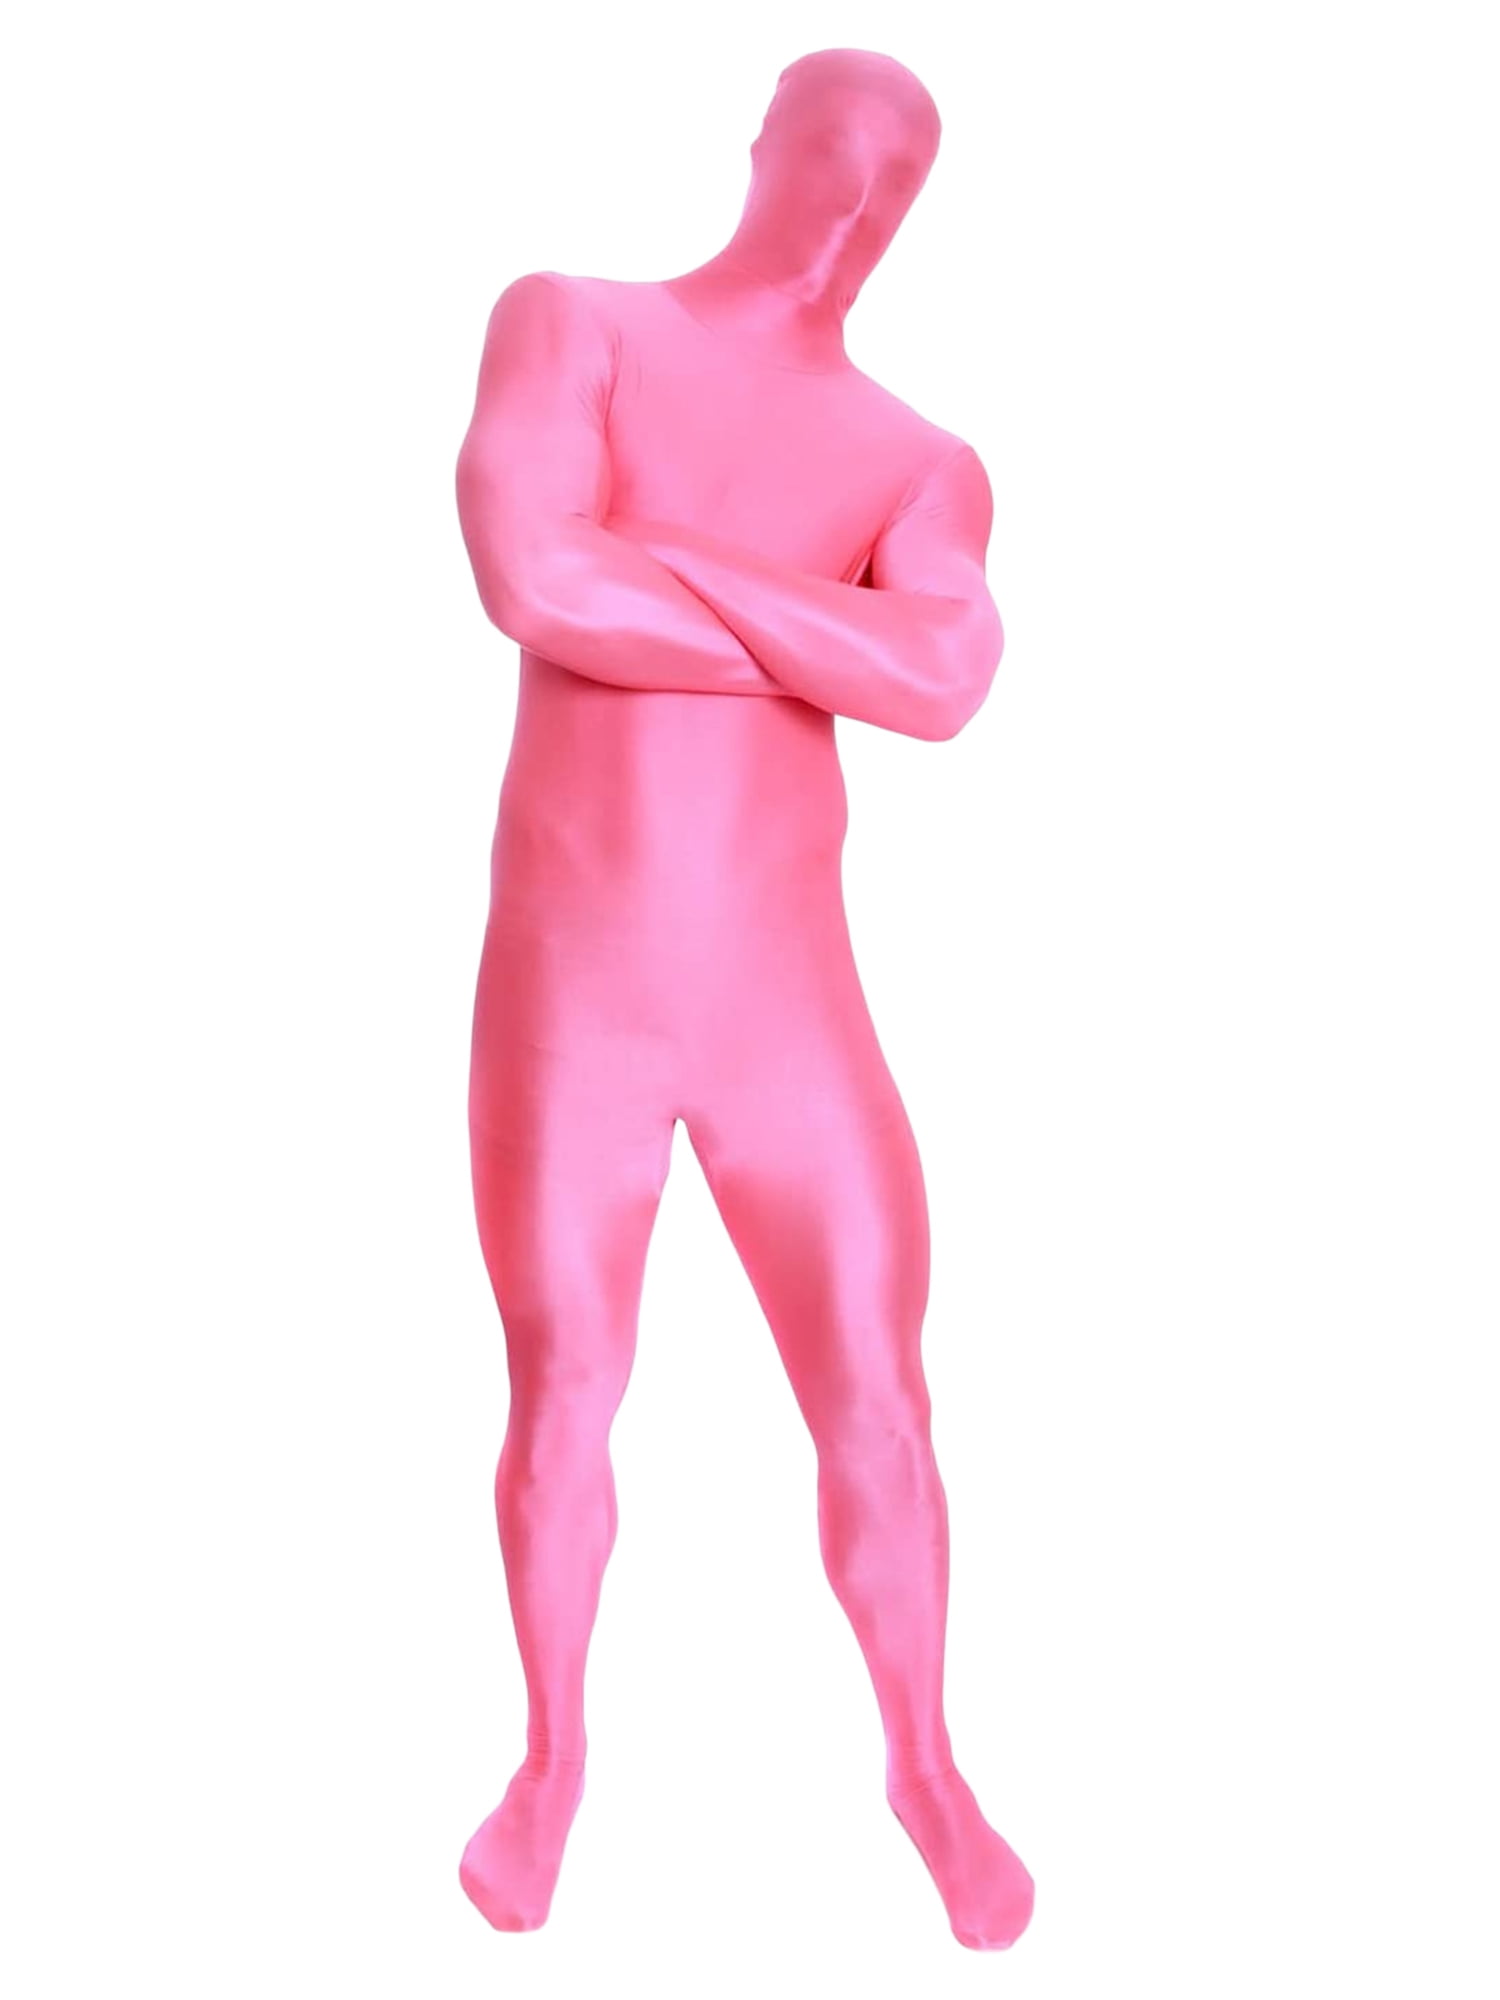 JYYYBF Halloween Full Bodysuit Adult Kids Invisibility Jumpsuit Spandex  Stretch Costume Chromakey Disappearing Body Suit Pink XL 